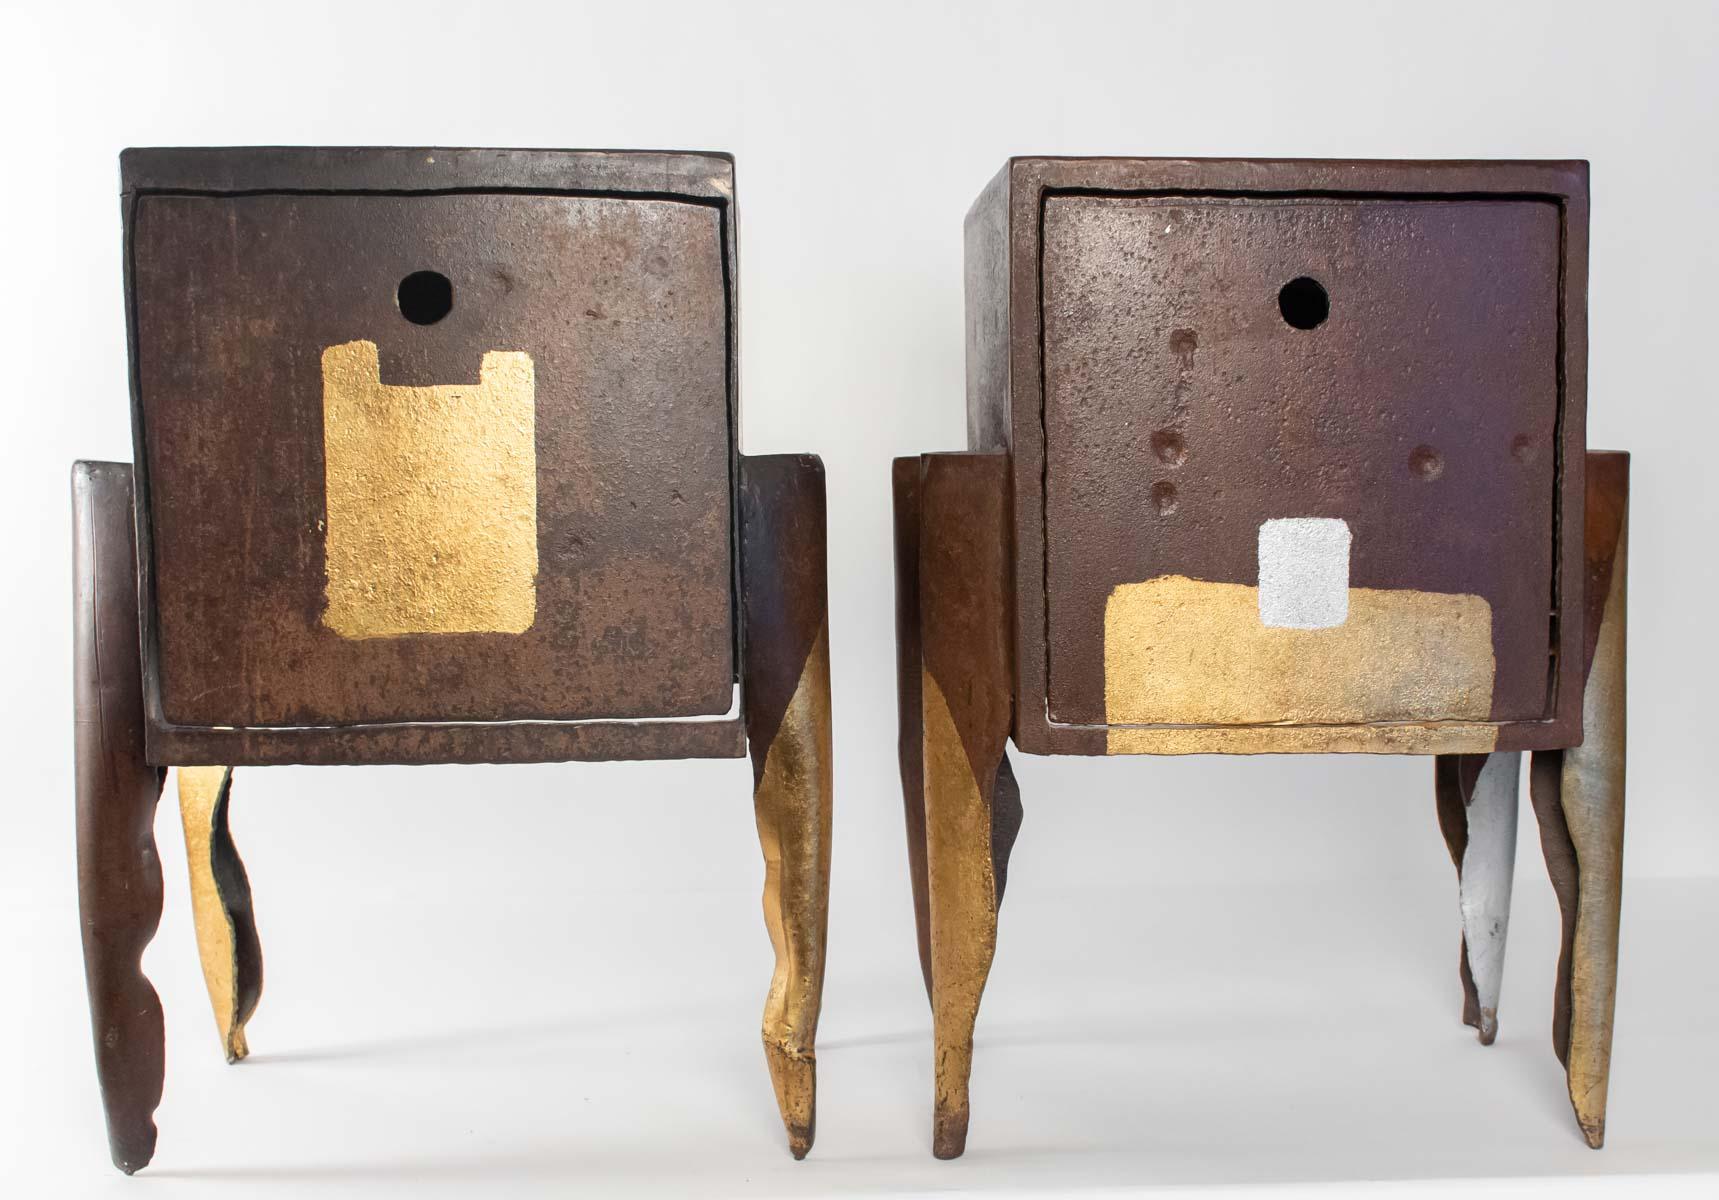 Pair of bedside table from the artist Jean-Jacques Argueyrolles, 20th century, iron folded and worked, gilding with gold leaf.
Measures: H 72cm, W 40cm, W 42cm.